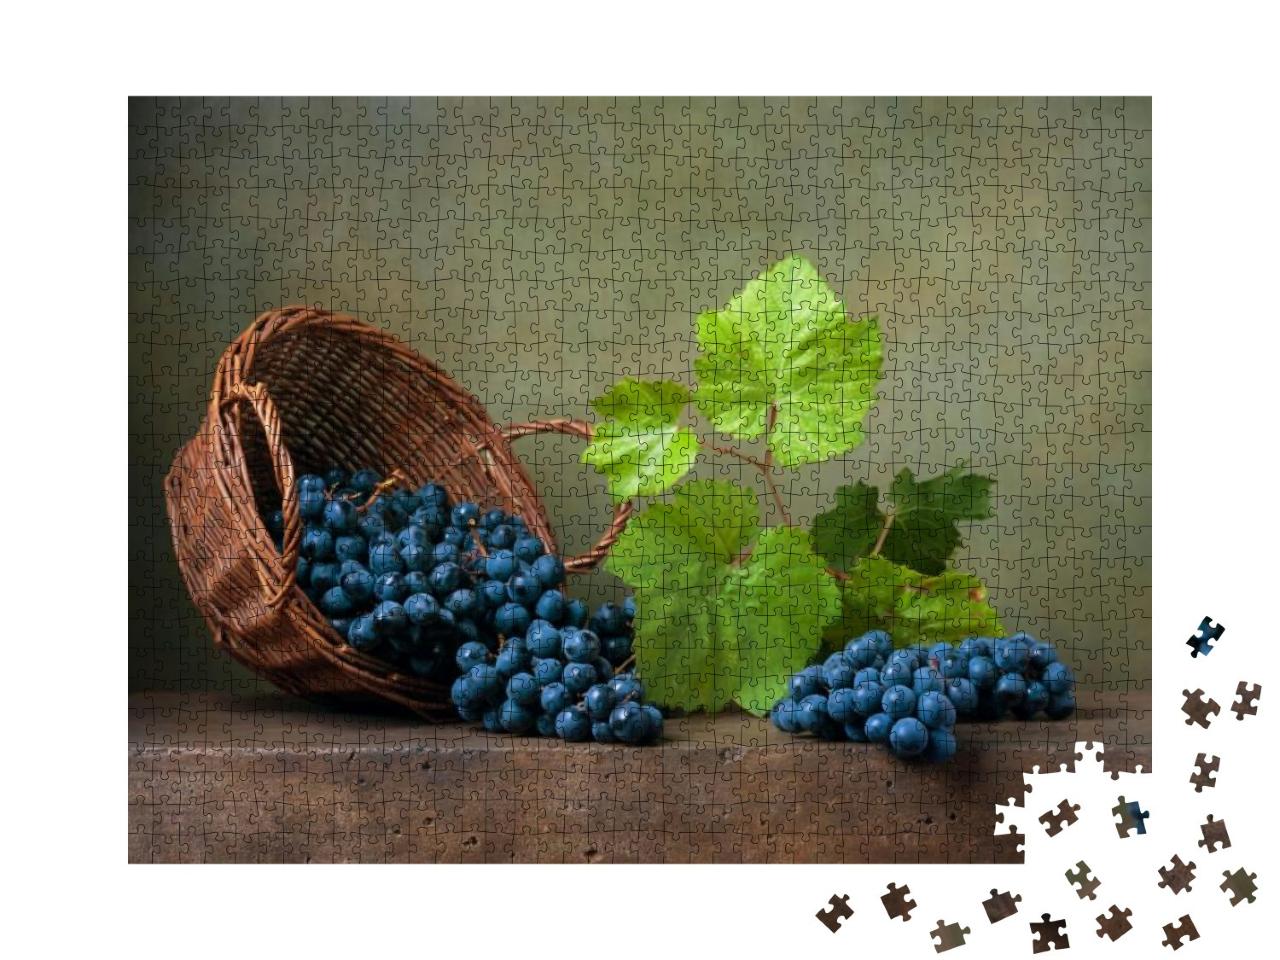 Still Life with Grapes on a Basket... Jigsaw Puzzle with 1000 pieces